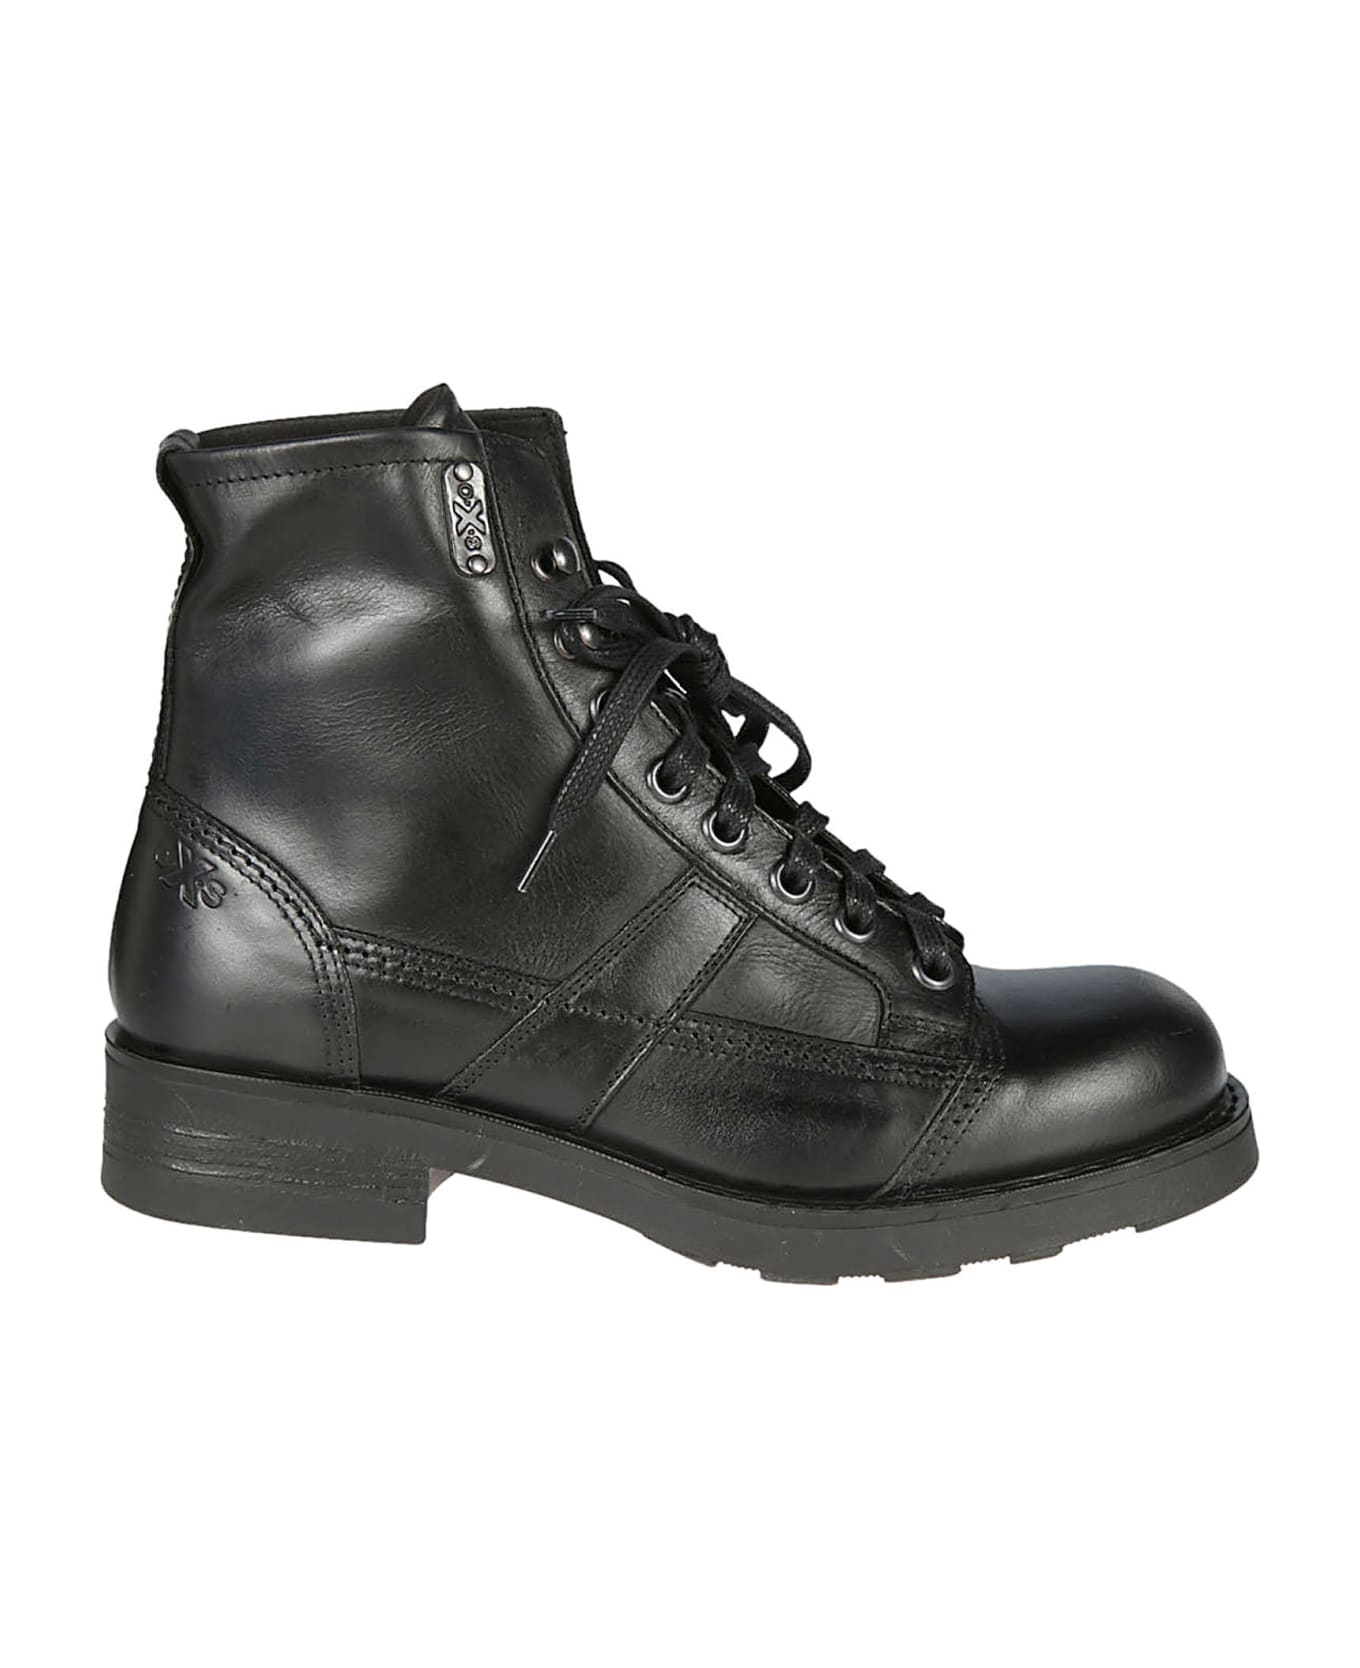 OXS Oxs John Men's Lace-up Boots | italist